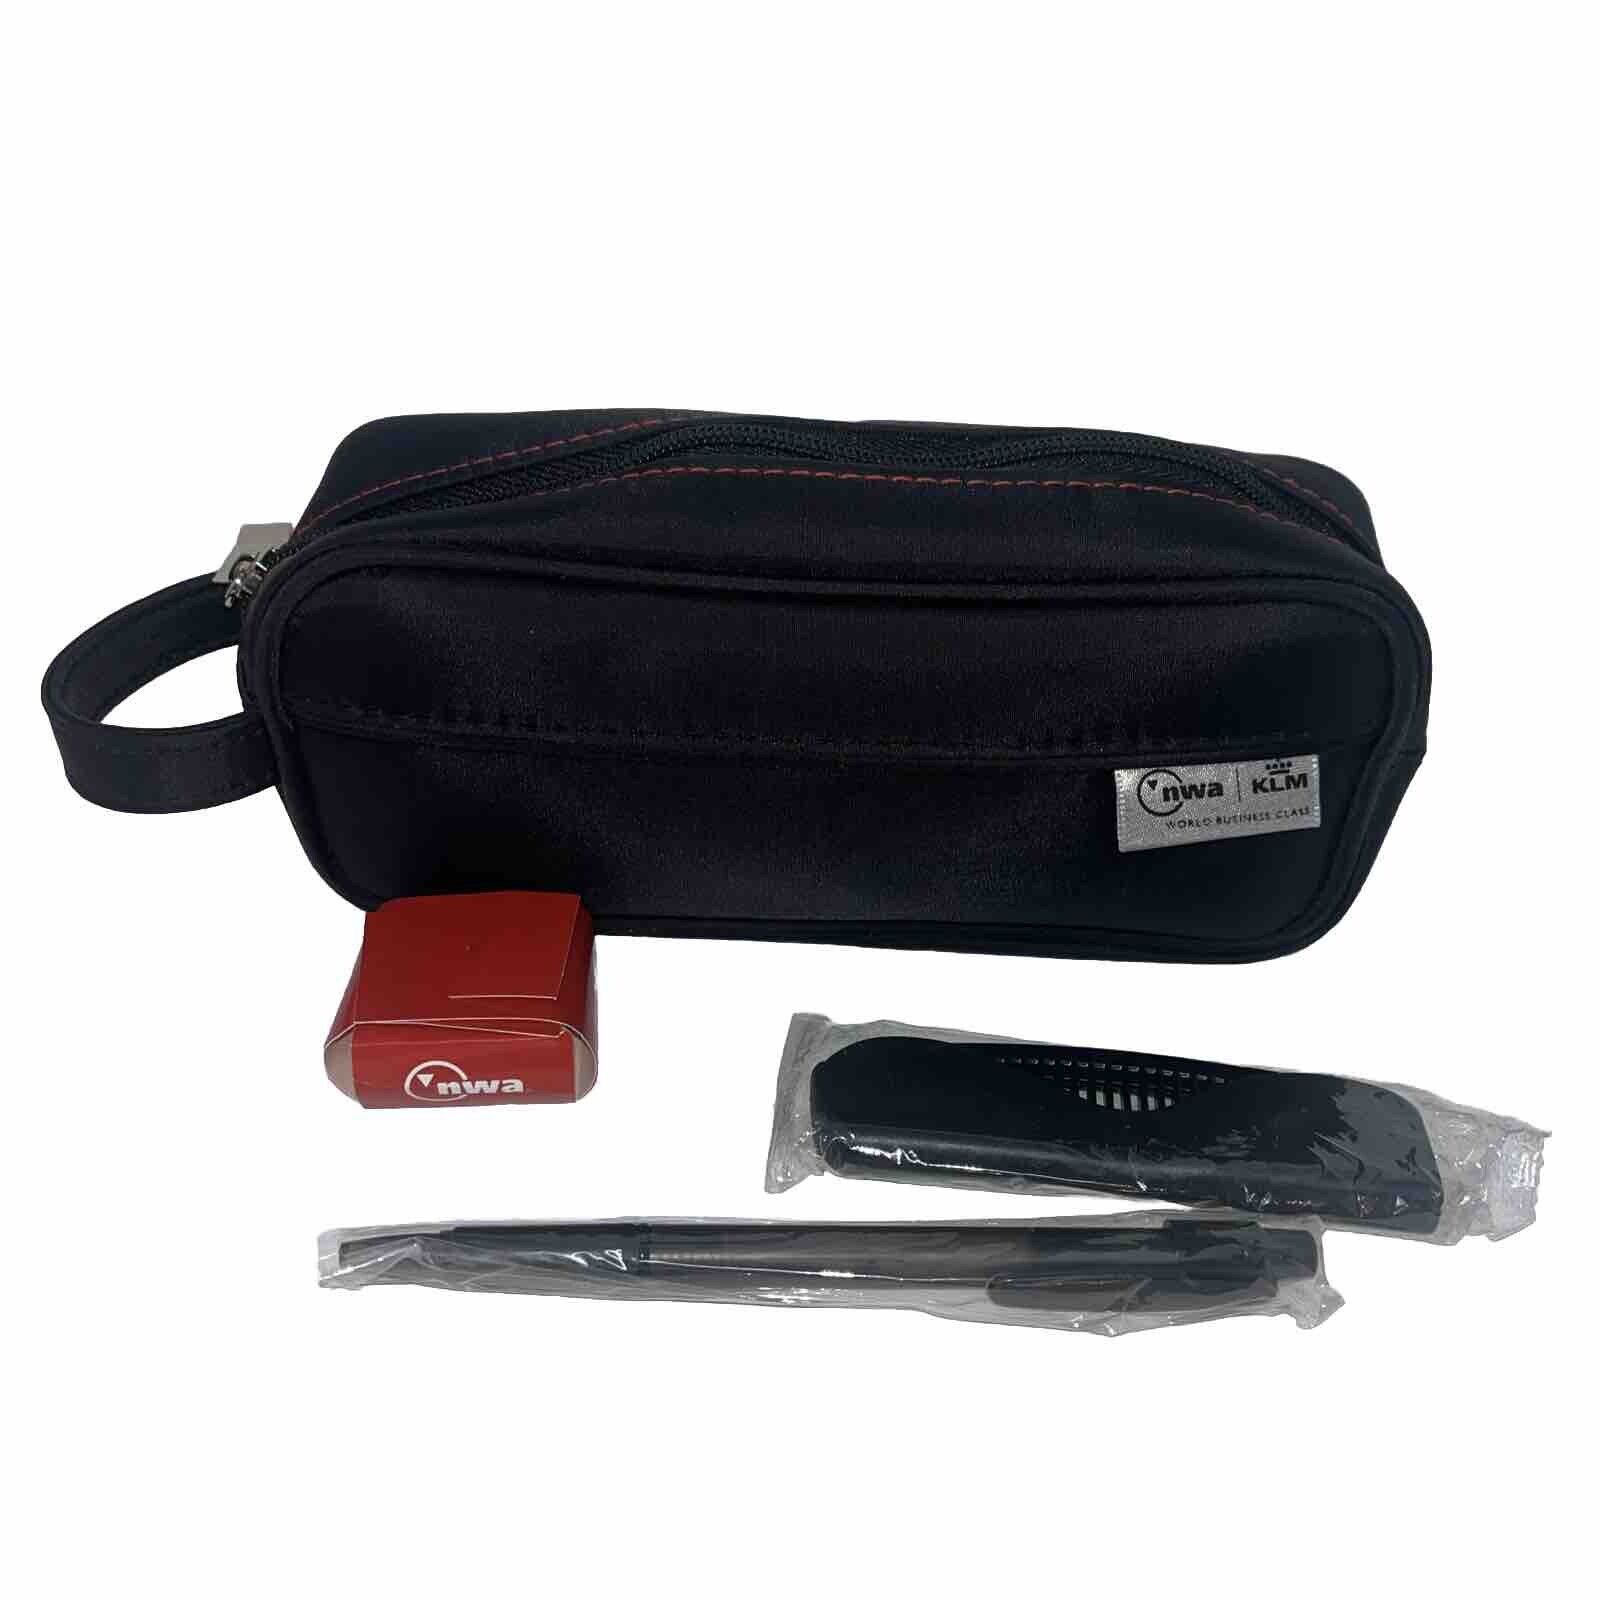 Northwest Airlines NWA KLM Amenity Kit Black World Business Class Toiletry Bag